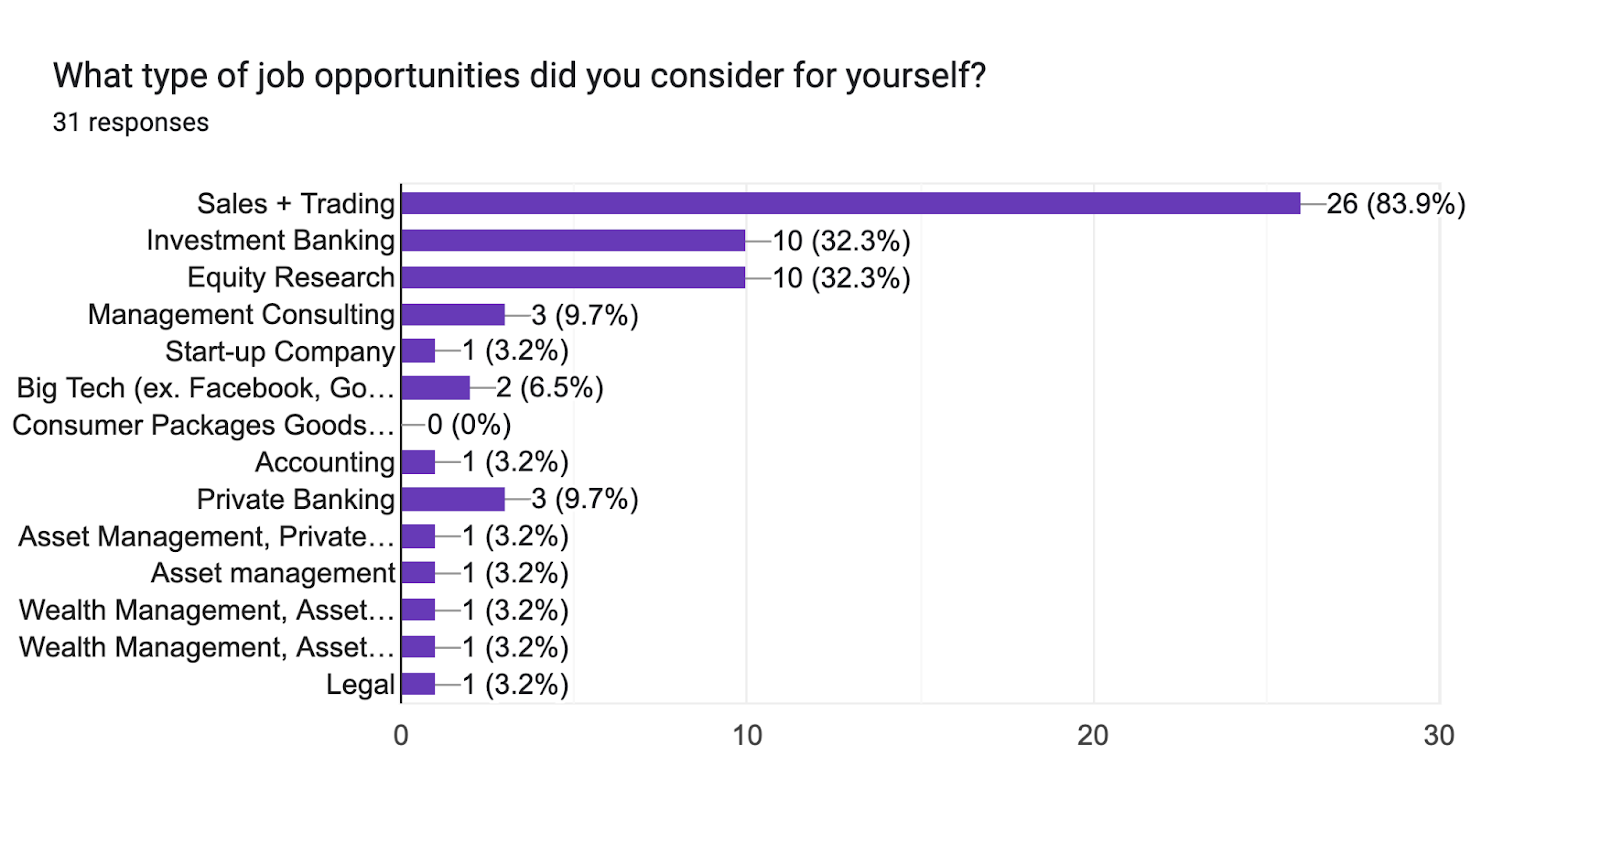 Forms response chart. Question title: What type of job opportunities did you consider for yourself? . Number of responses: 31 responses.